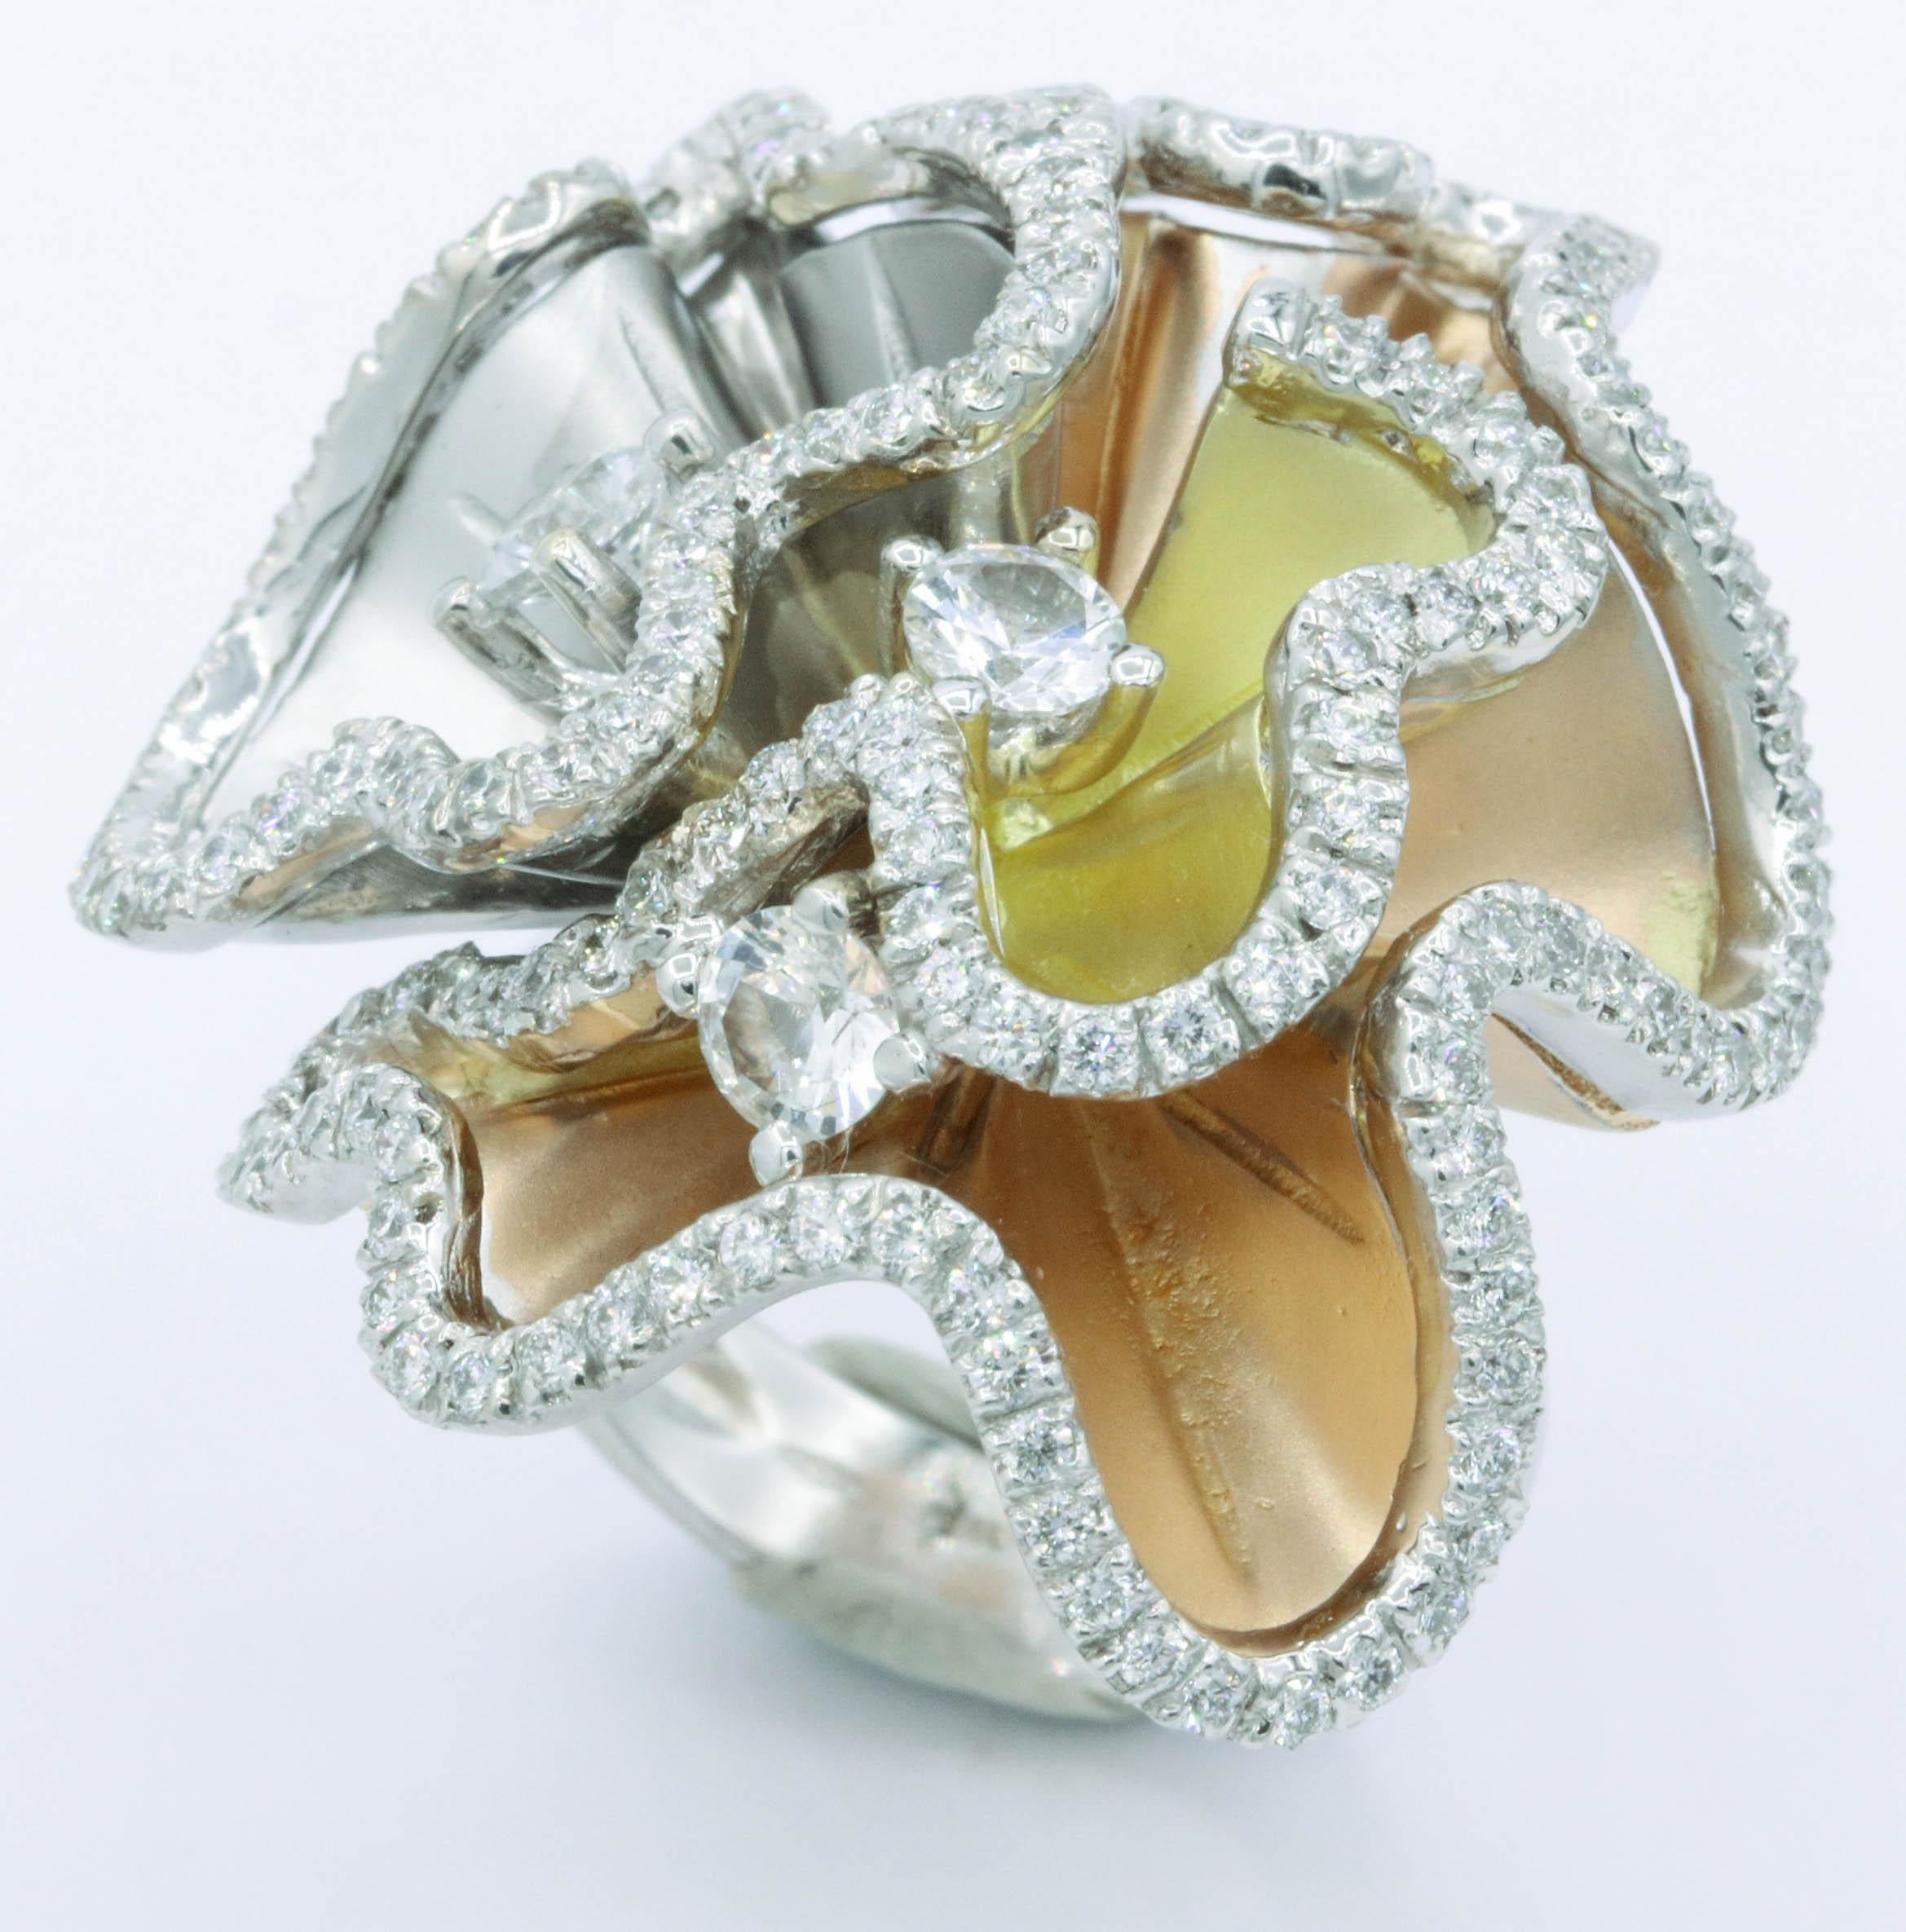 Women's Orchids Shape Flowers Ring or pendant  with Diamonds and White Sapphires